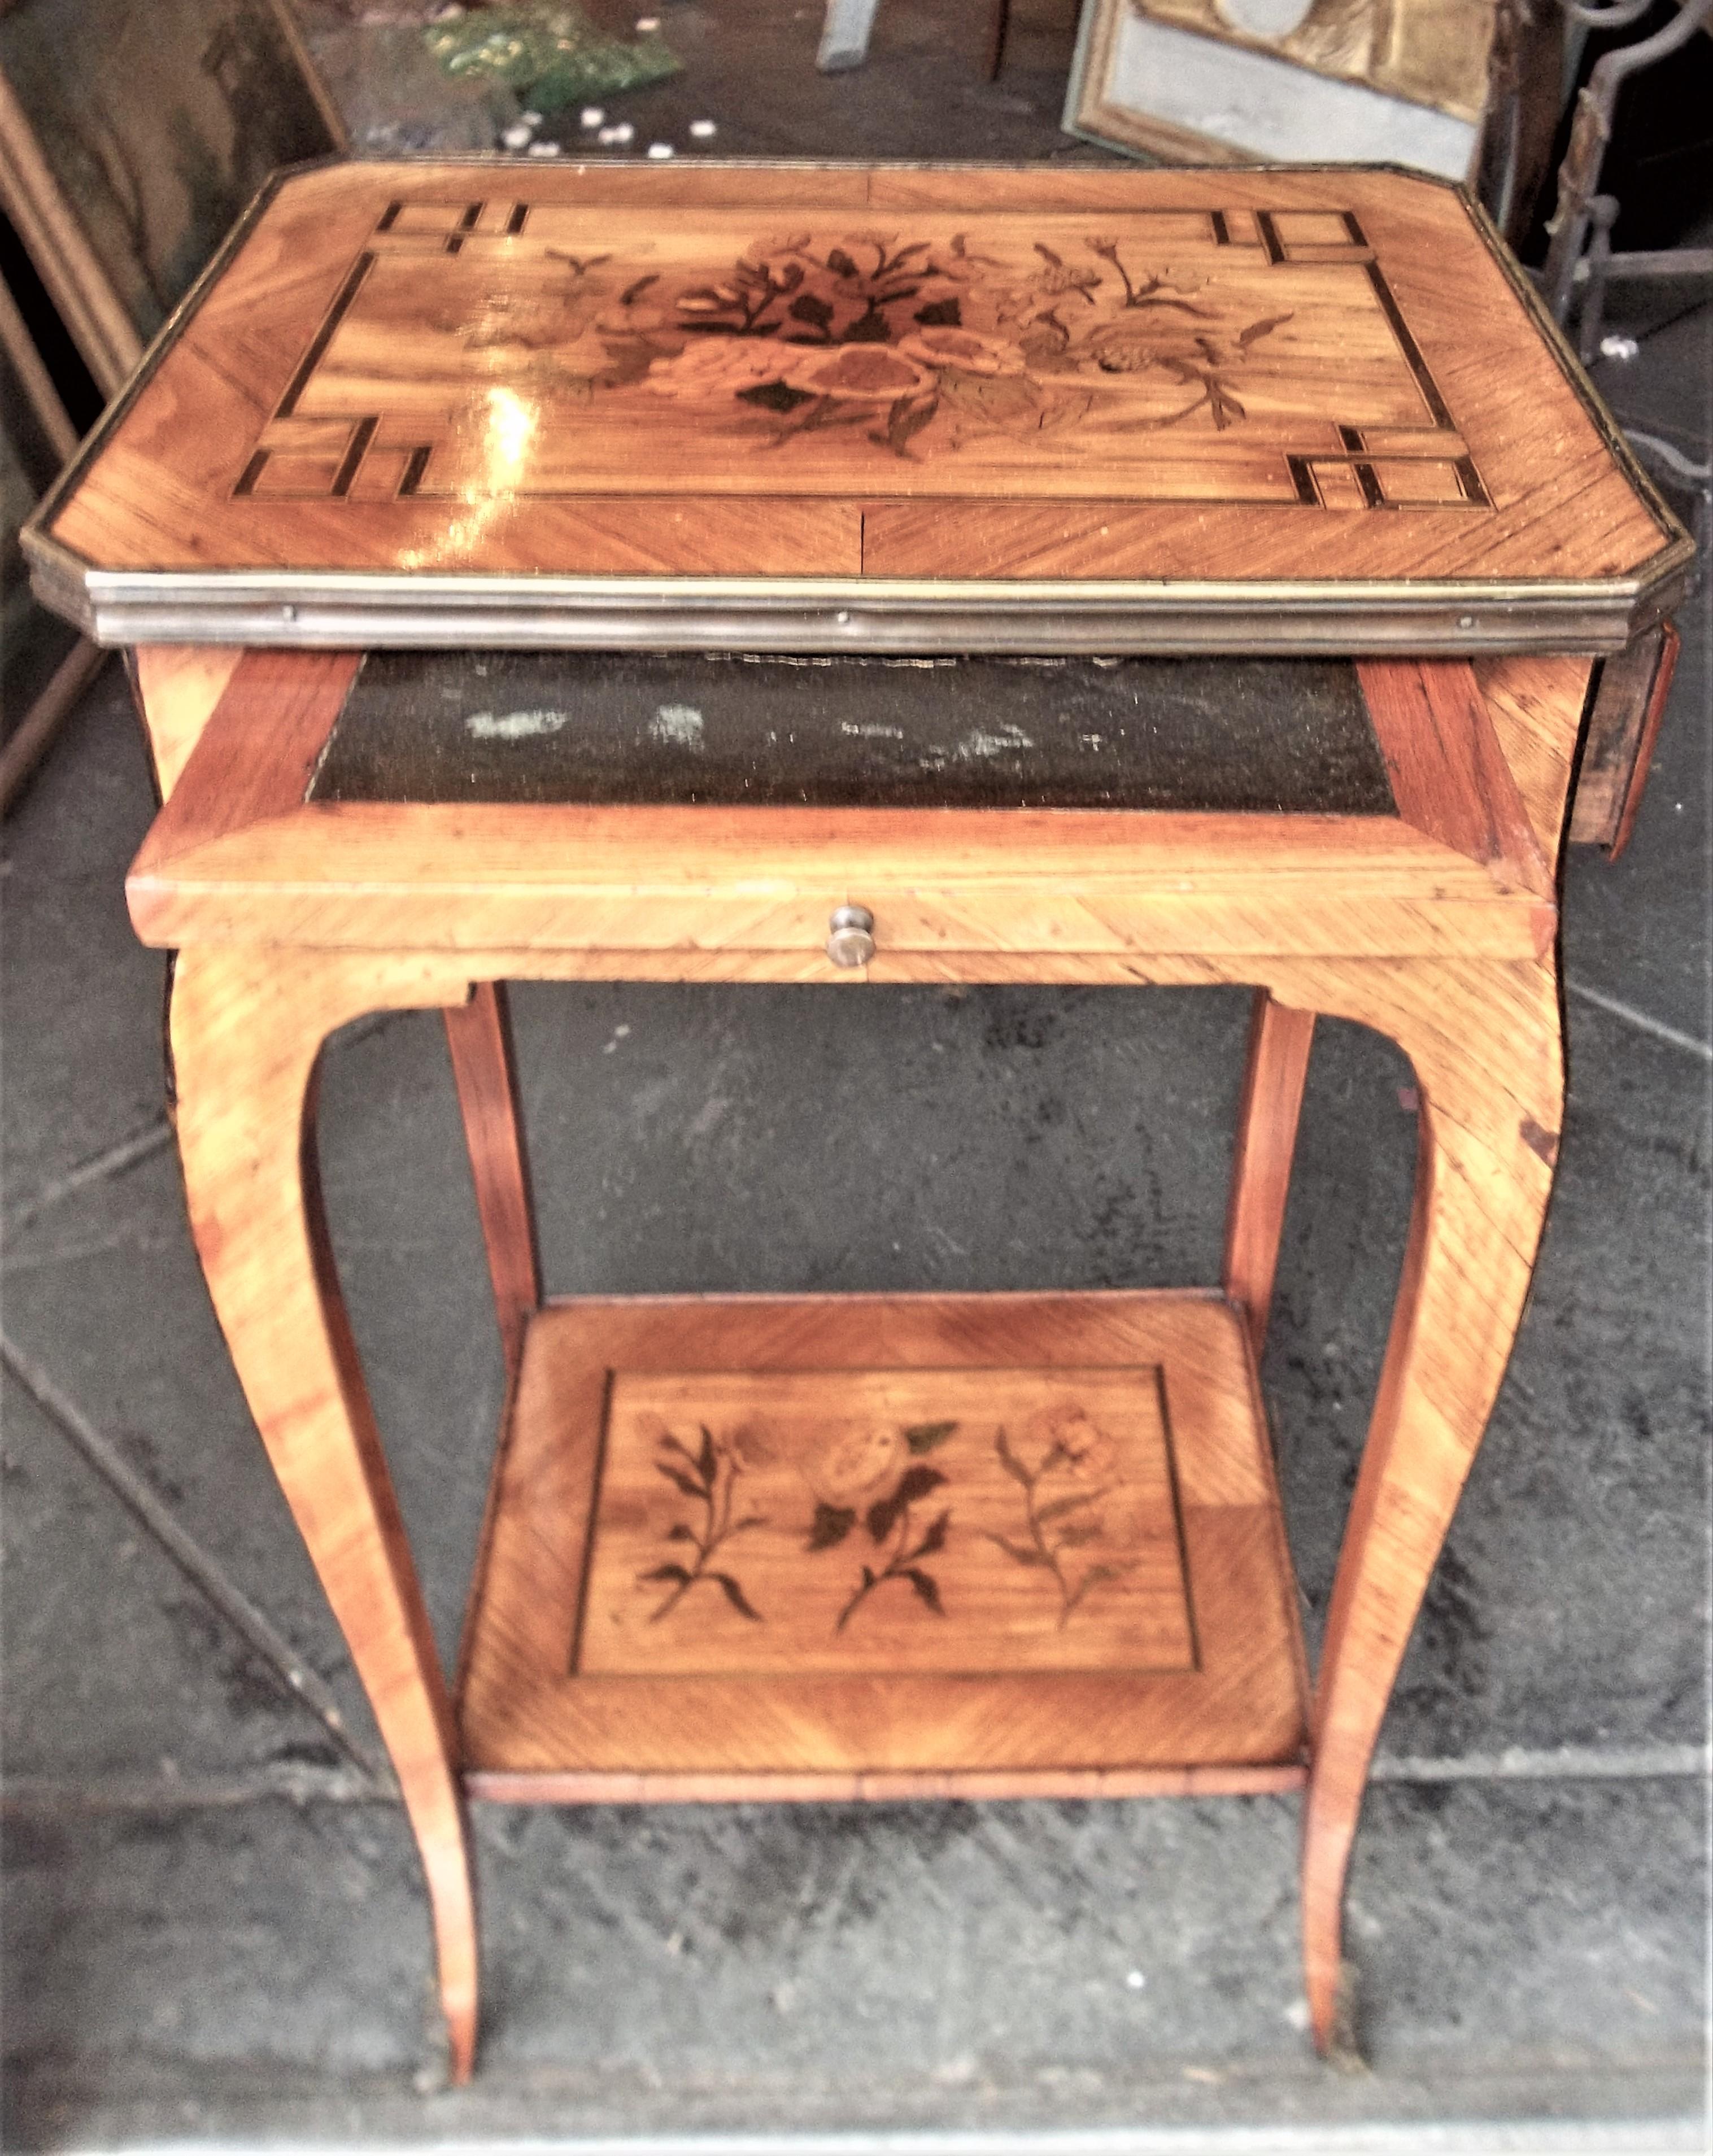 Louis XV Transitional to Louis XVI Style Marquetry Table 1